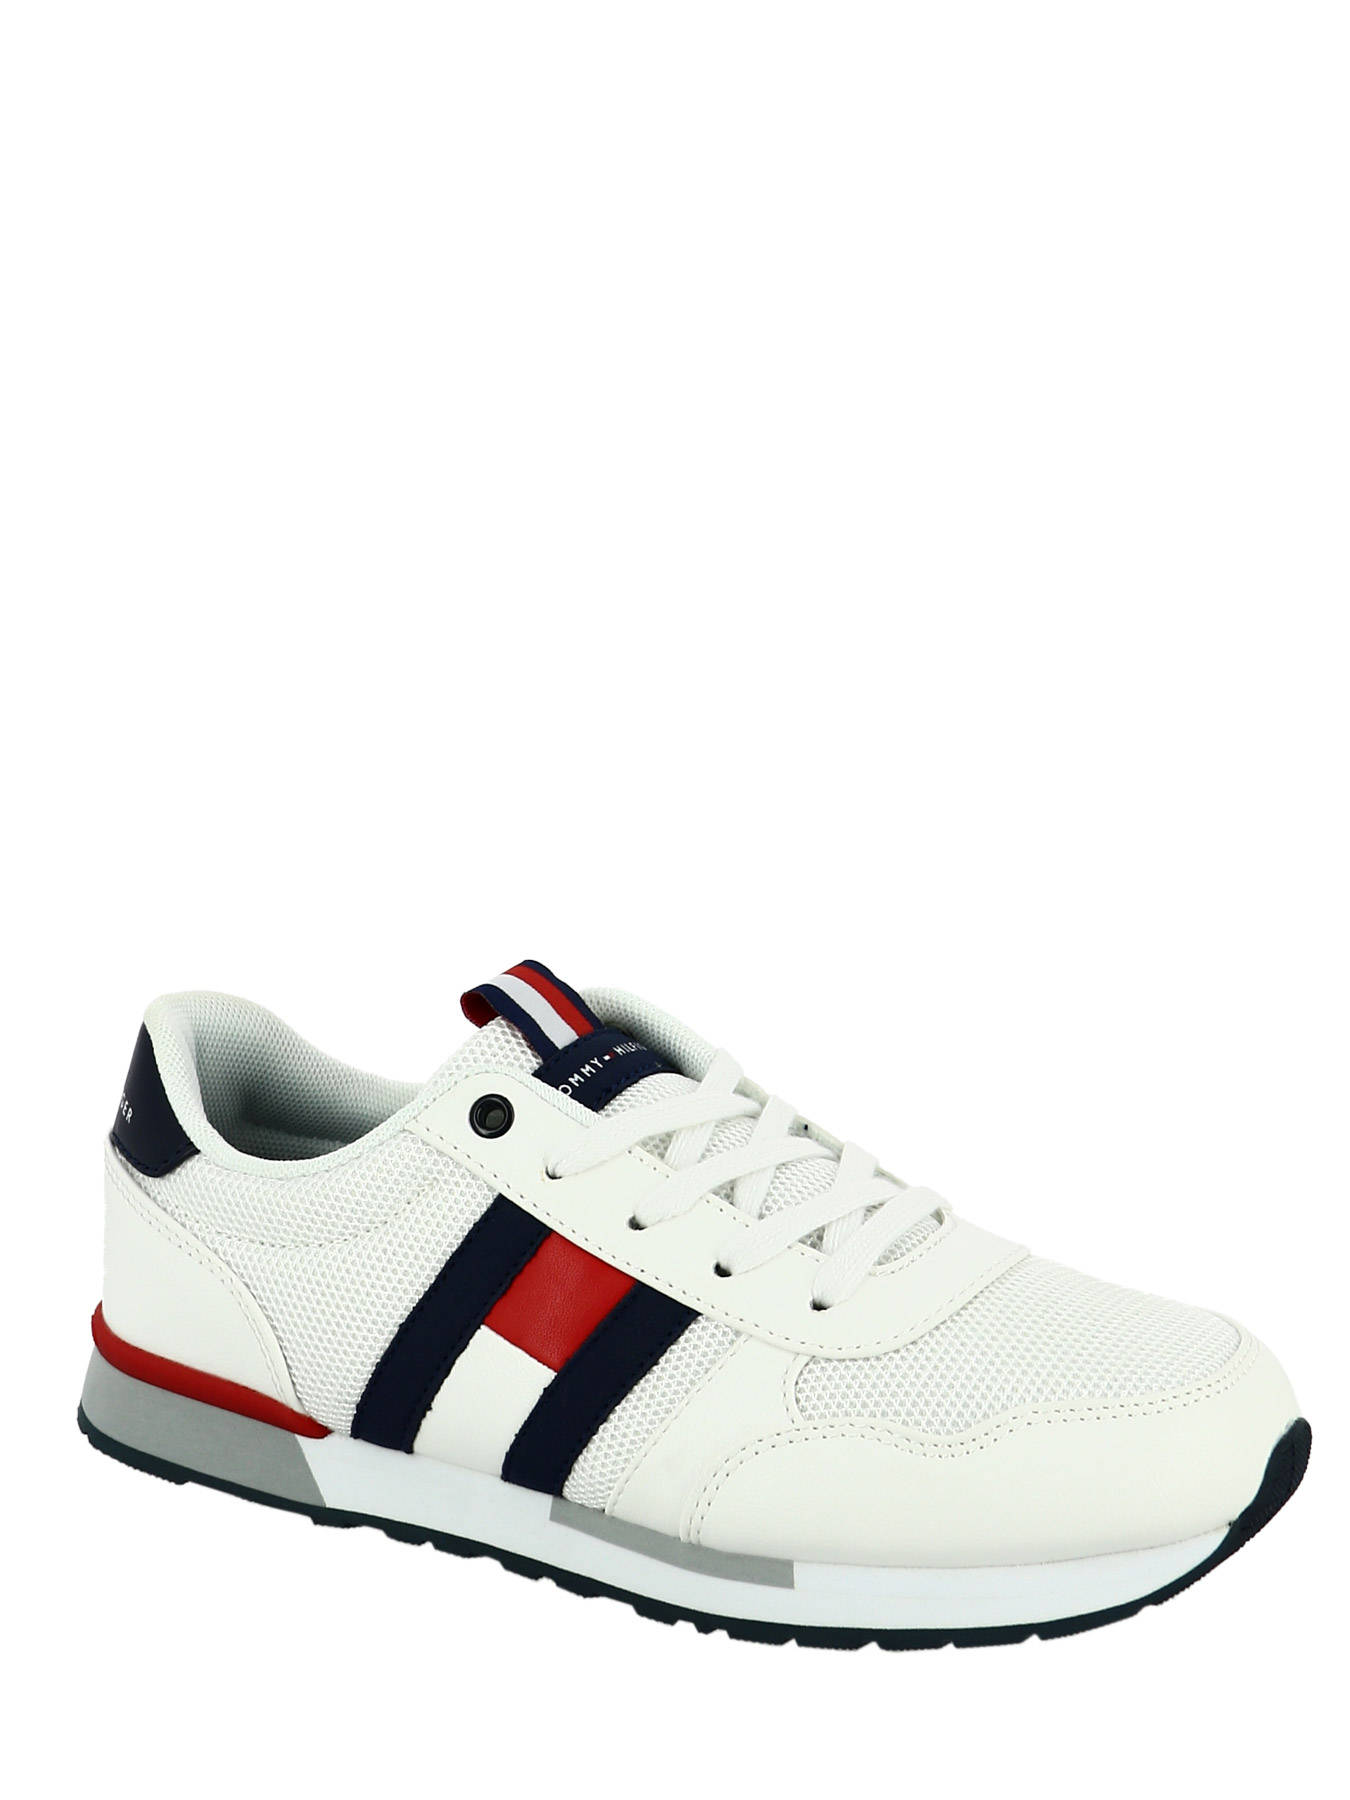 tommy hilfiger shoes price